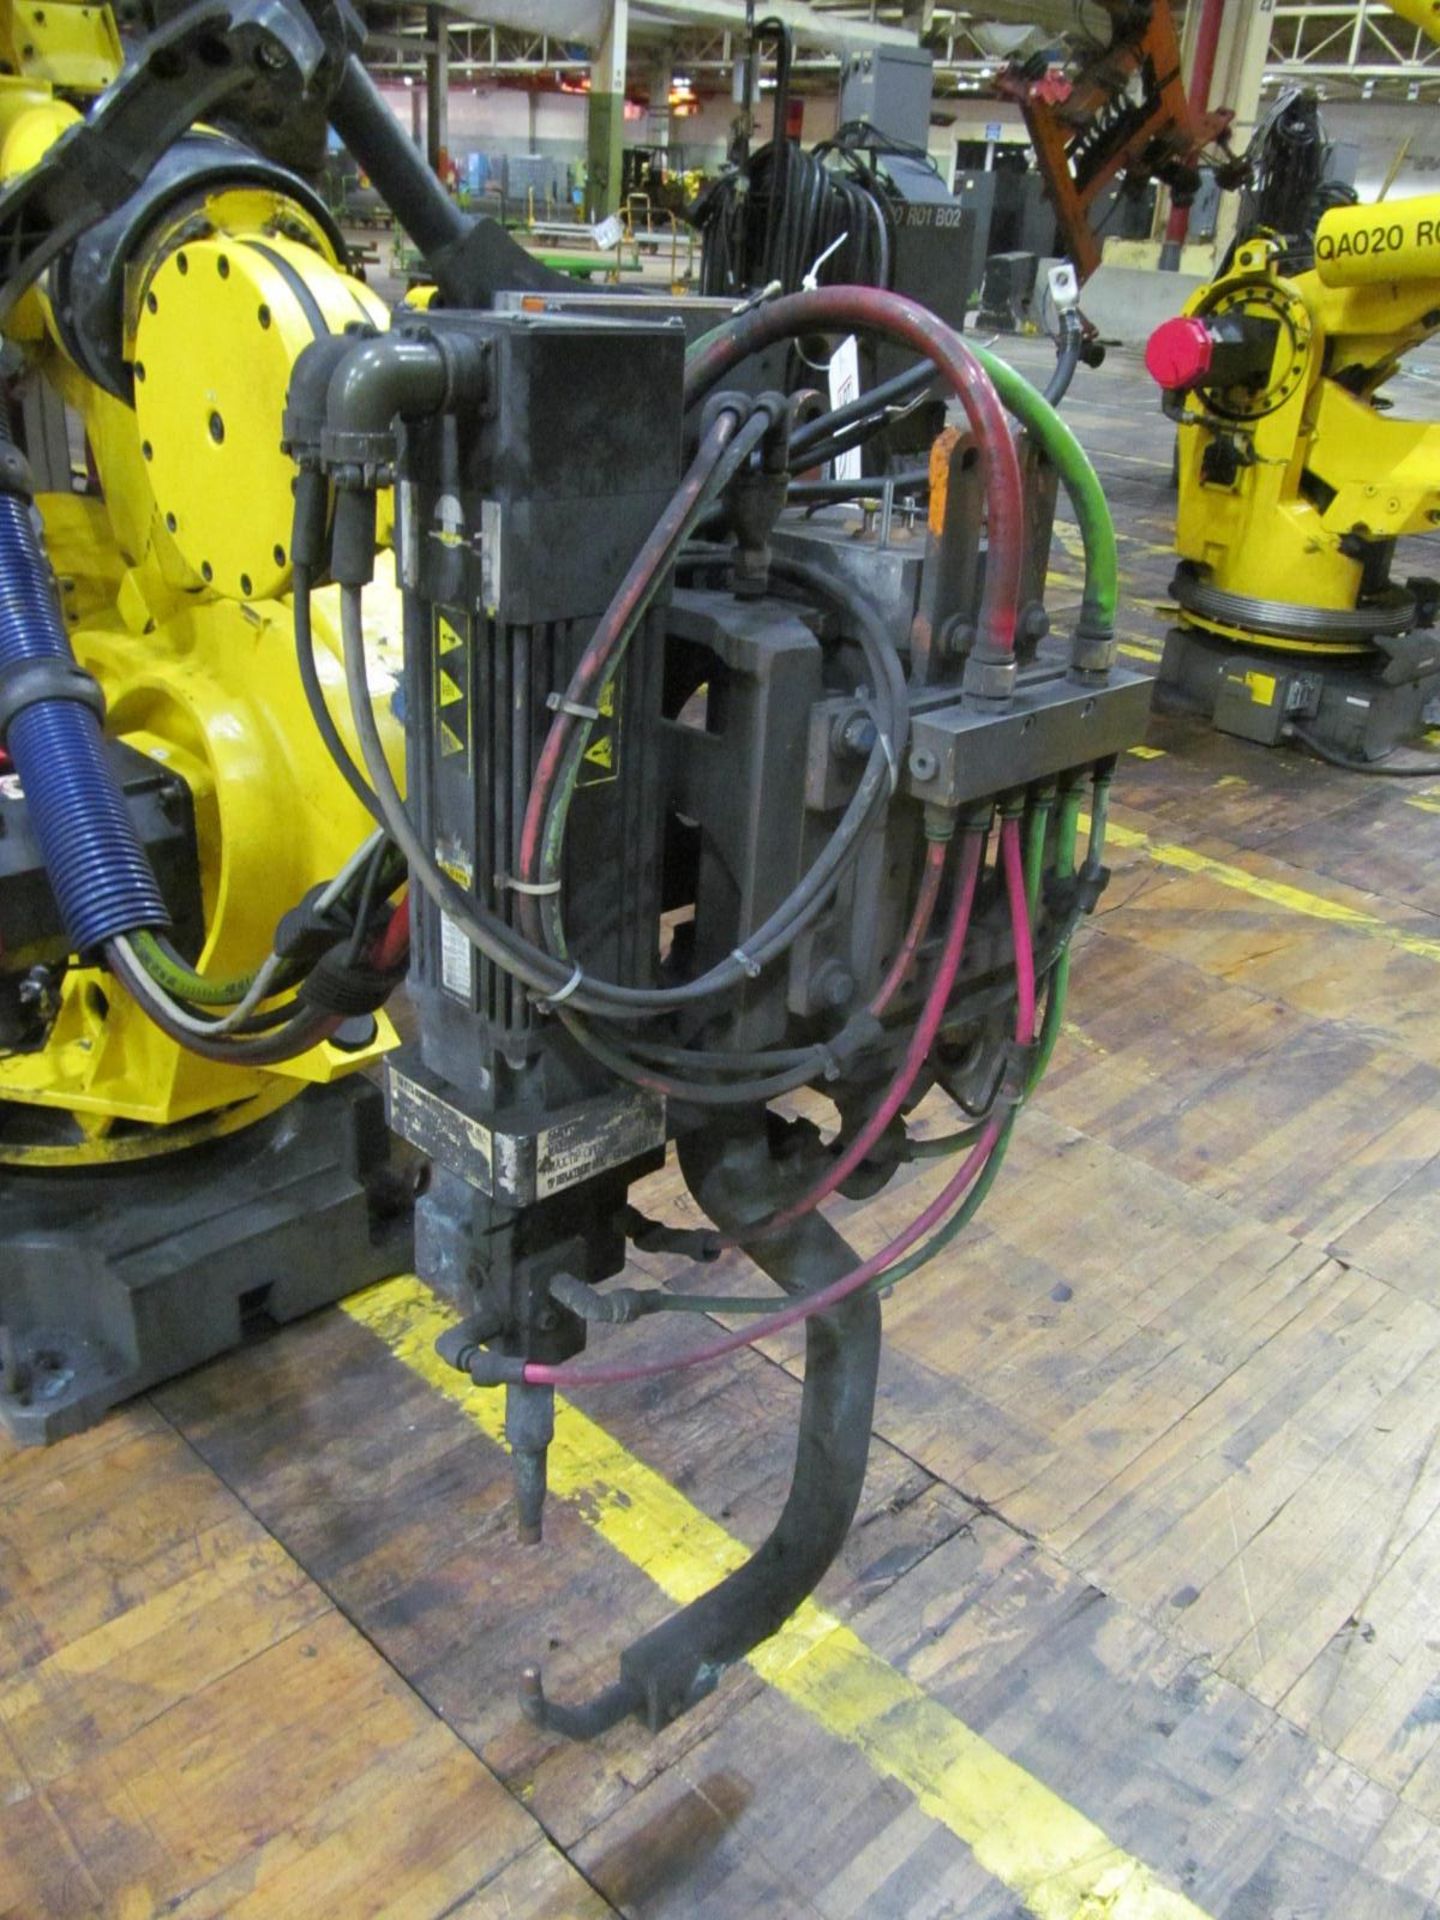 6-AXIS FANUC R-2000iB 210F ROBOT, S/N R08X01646 (2008), TYPE A05B-1329-B205, R-30iA CONTROL, SPOT - Image 3 of 5